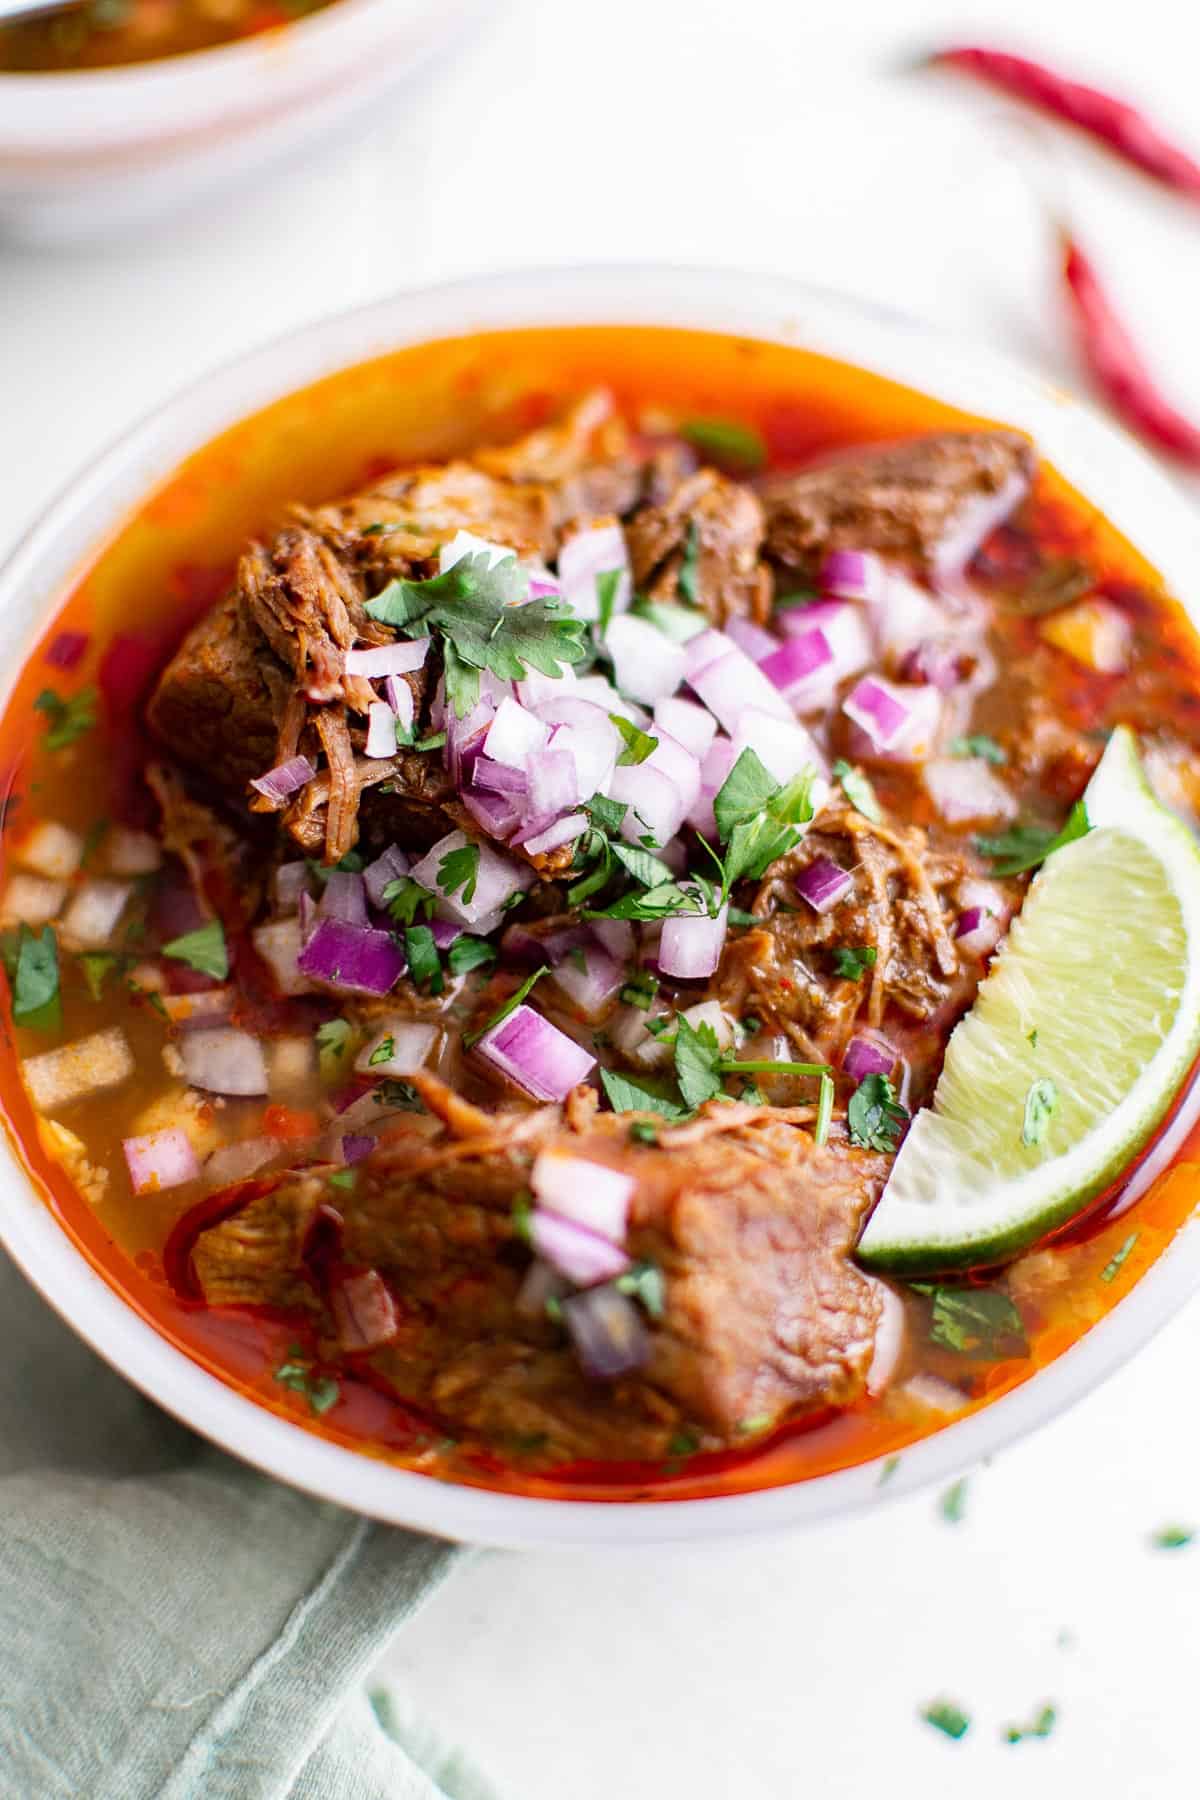 a bowl of beef birria Mexican stew, garnishes with red onion, cilantro and lime